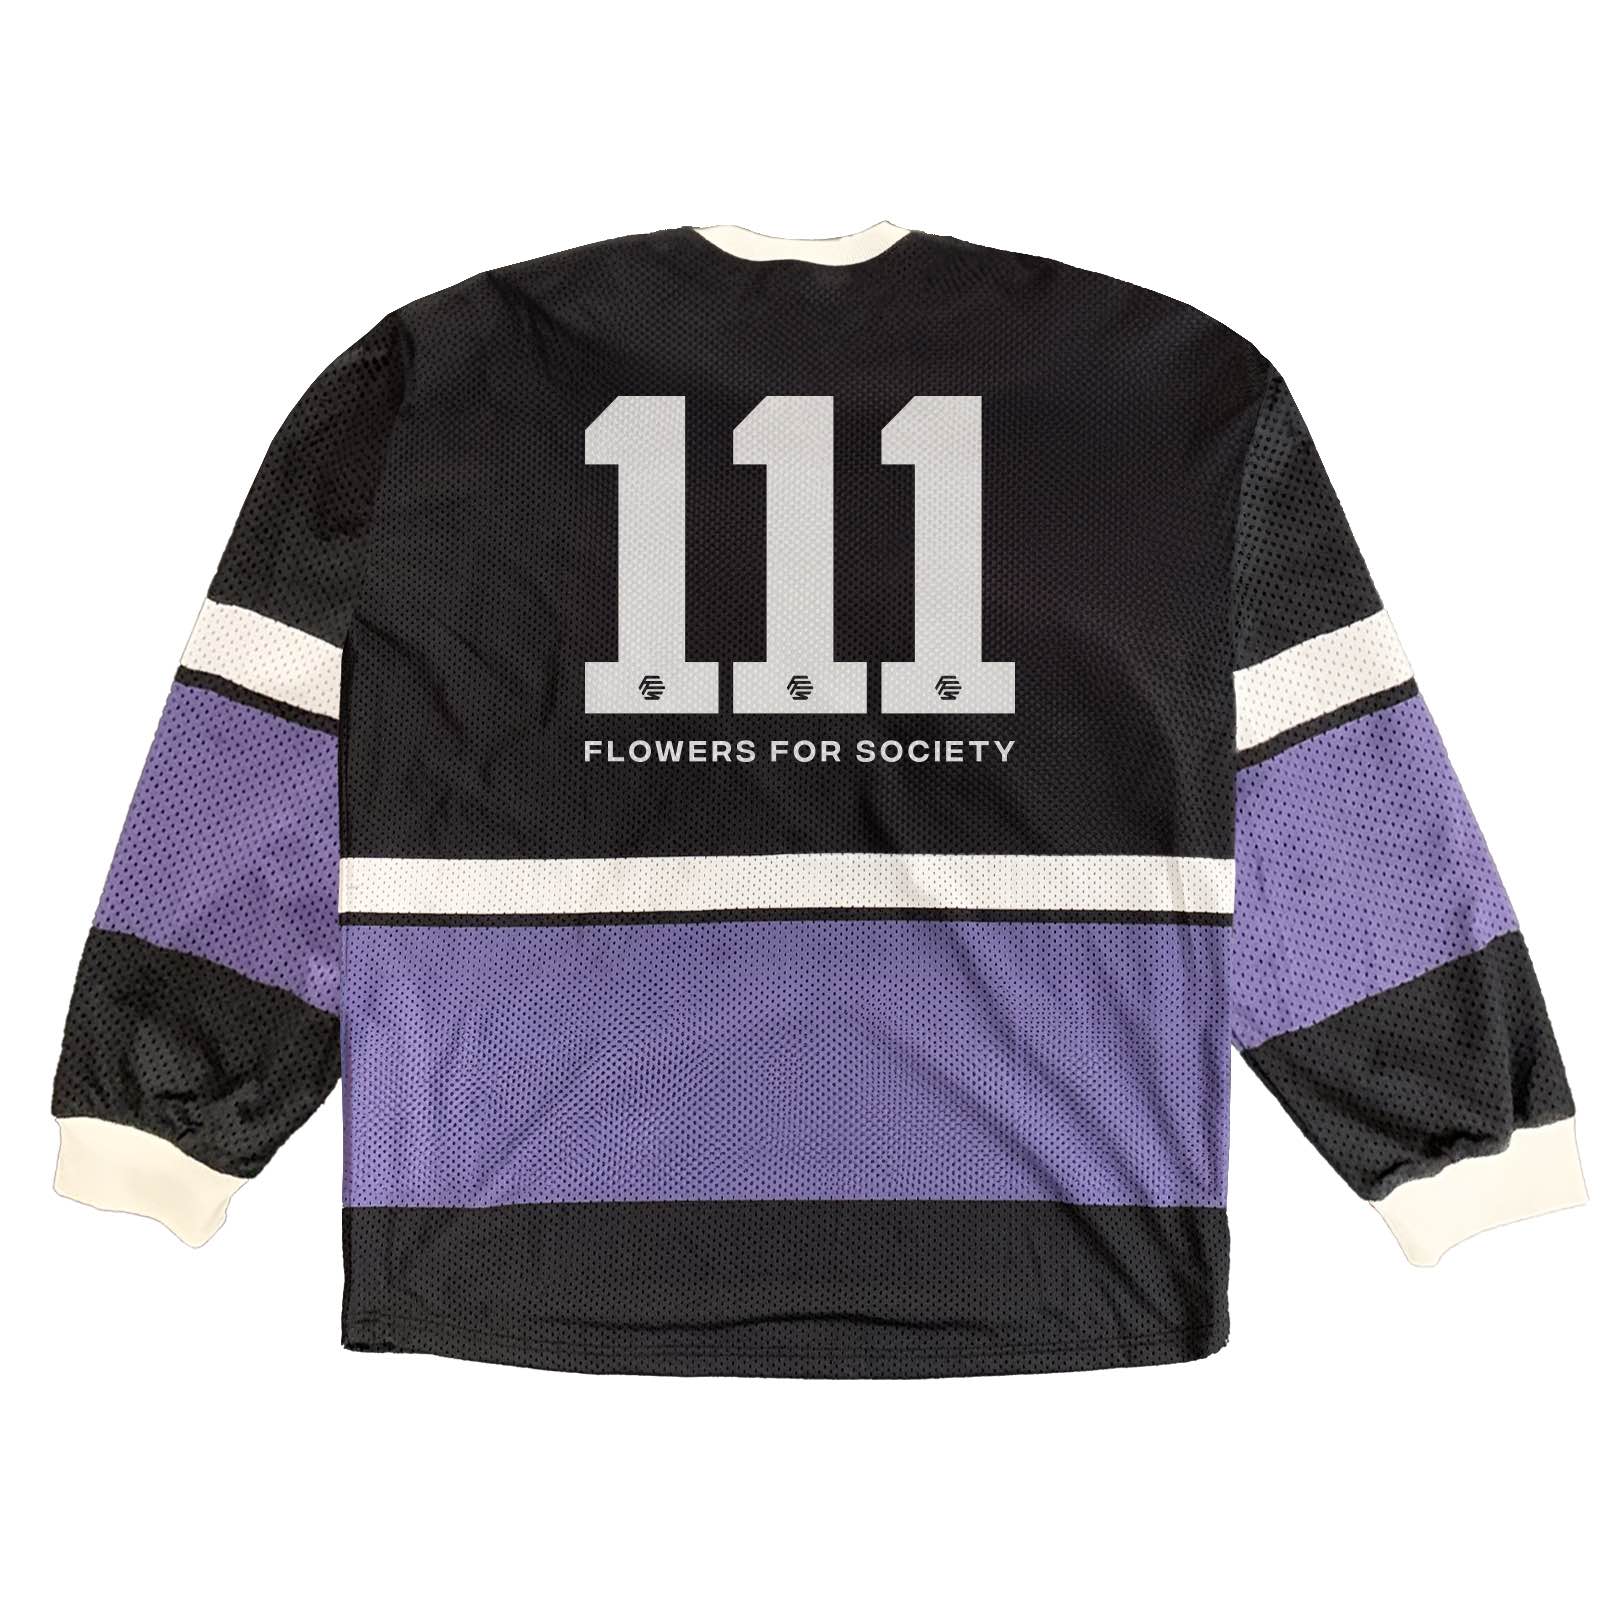 Flowers for Society flowers mesh jersey black purple back view